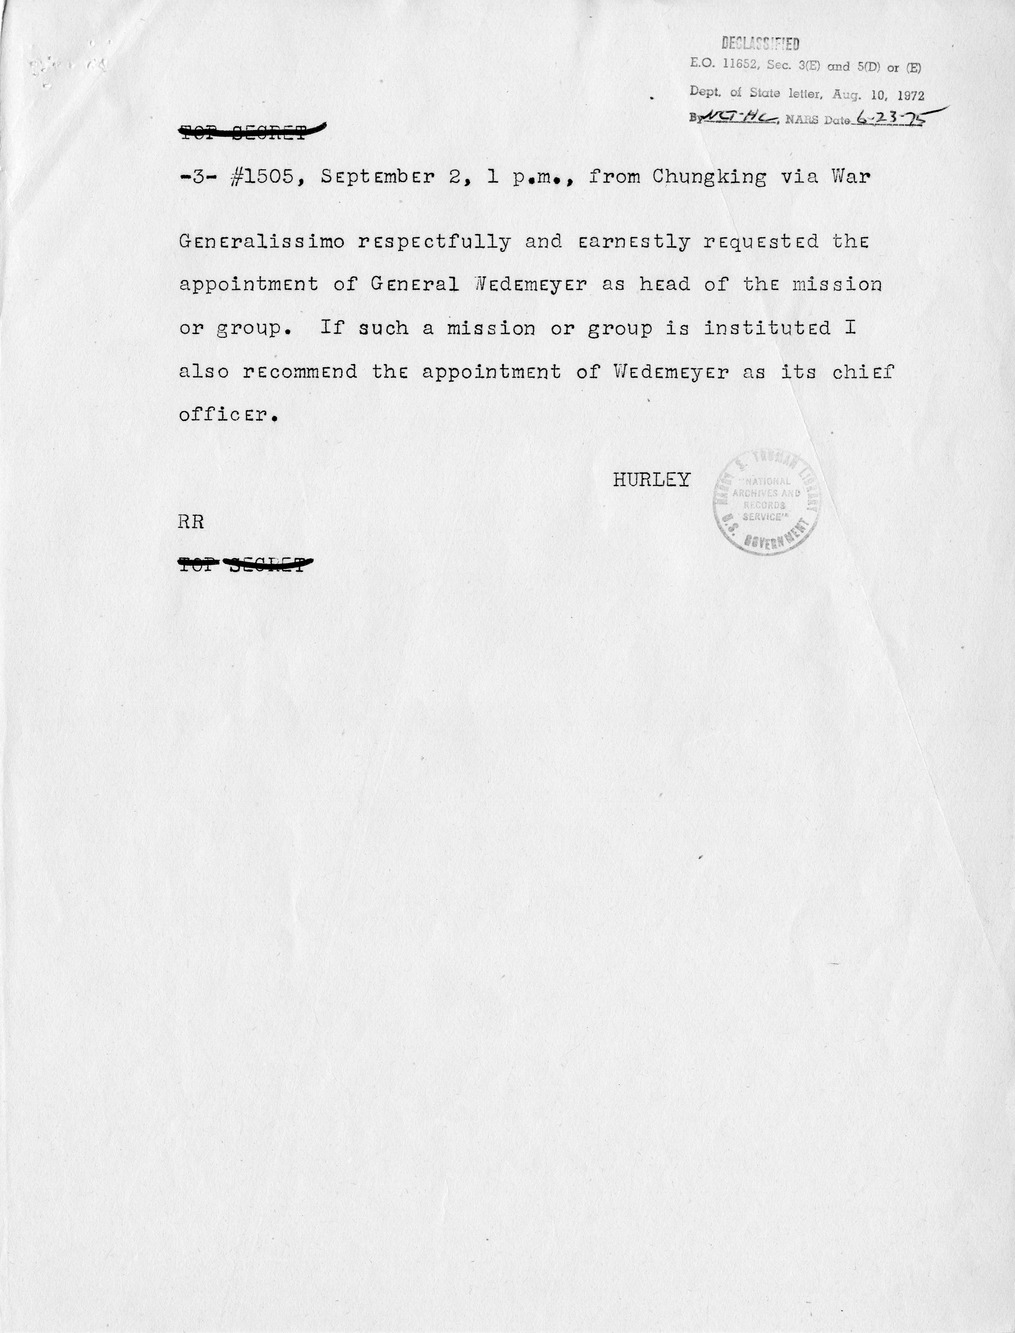 Memorandum from Secretary of State James Byrnes to President Harry S. Truman, with Attachments